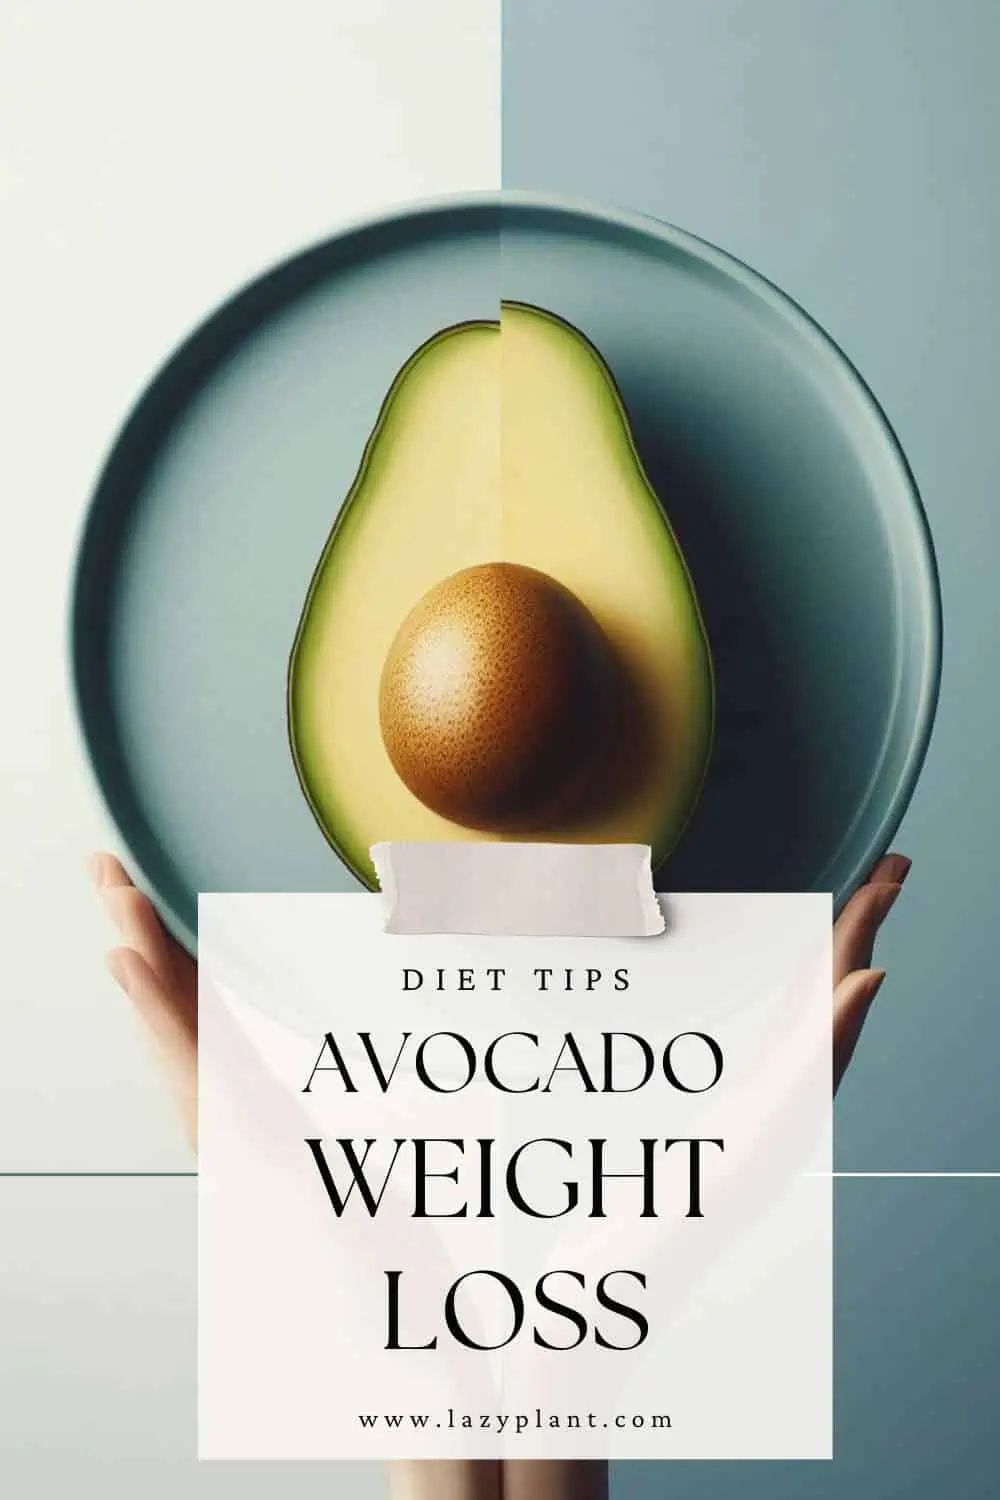 eat Avocados for Weight Loss